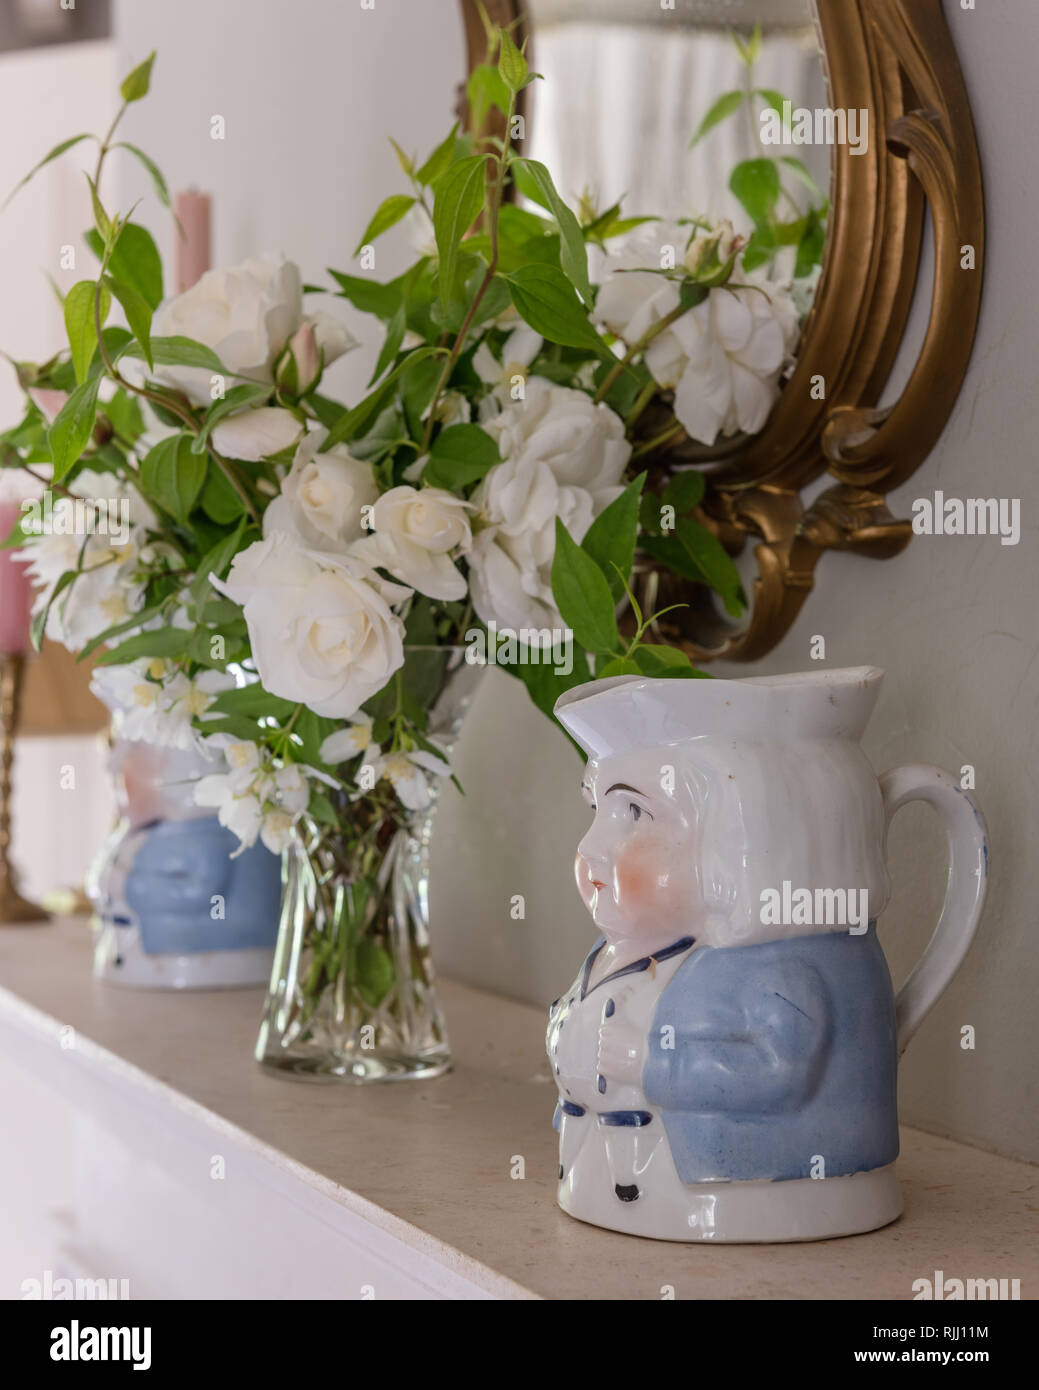 Toby jugs and cut white roses on mantlepiece Stock Photo